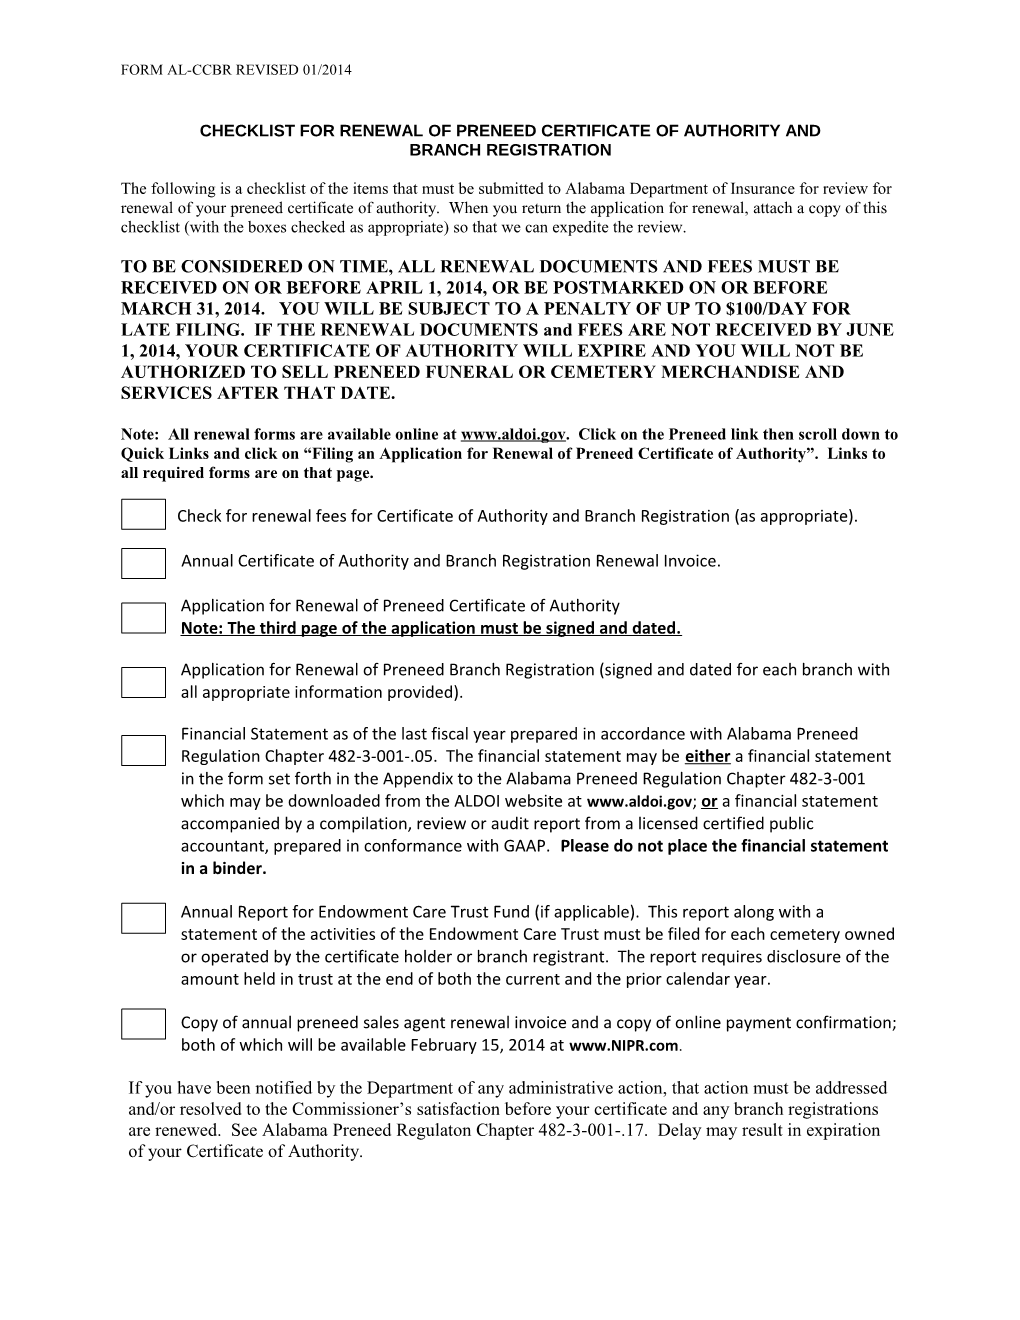 Checklist for Renewal of Preneed Certificate of Authority And